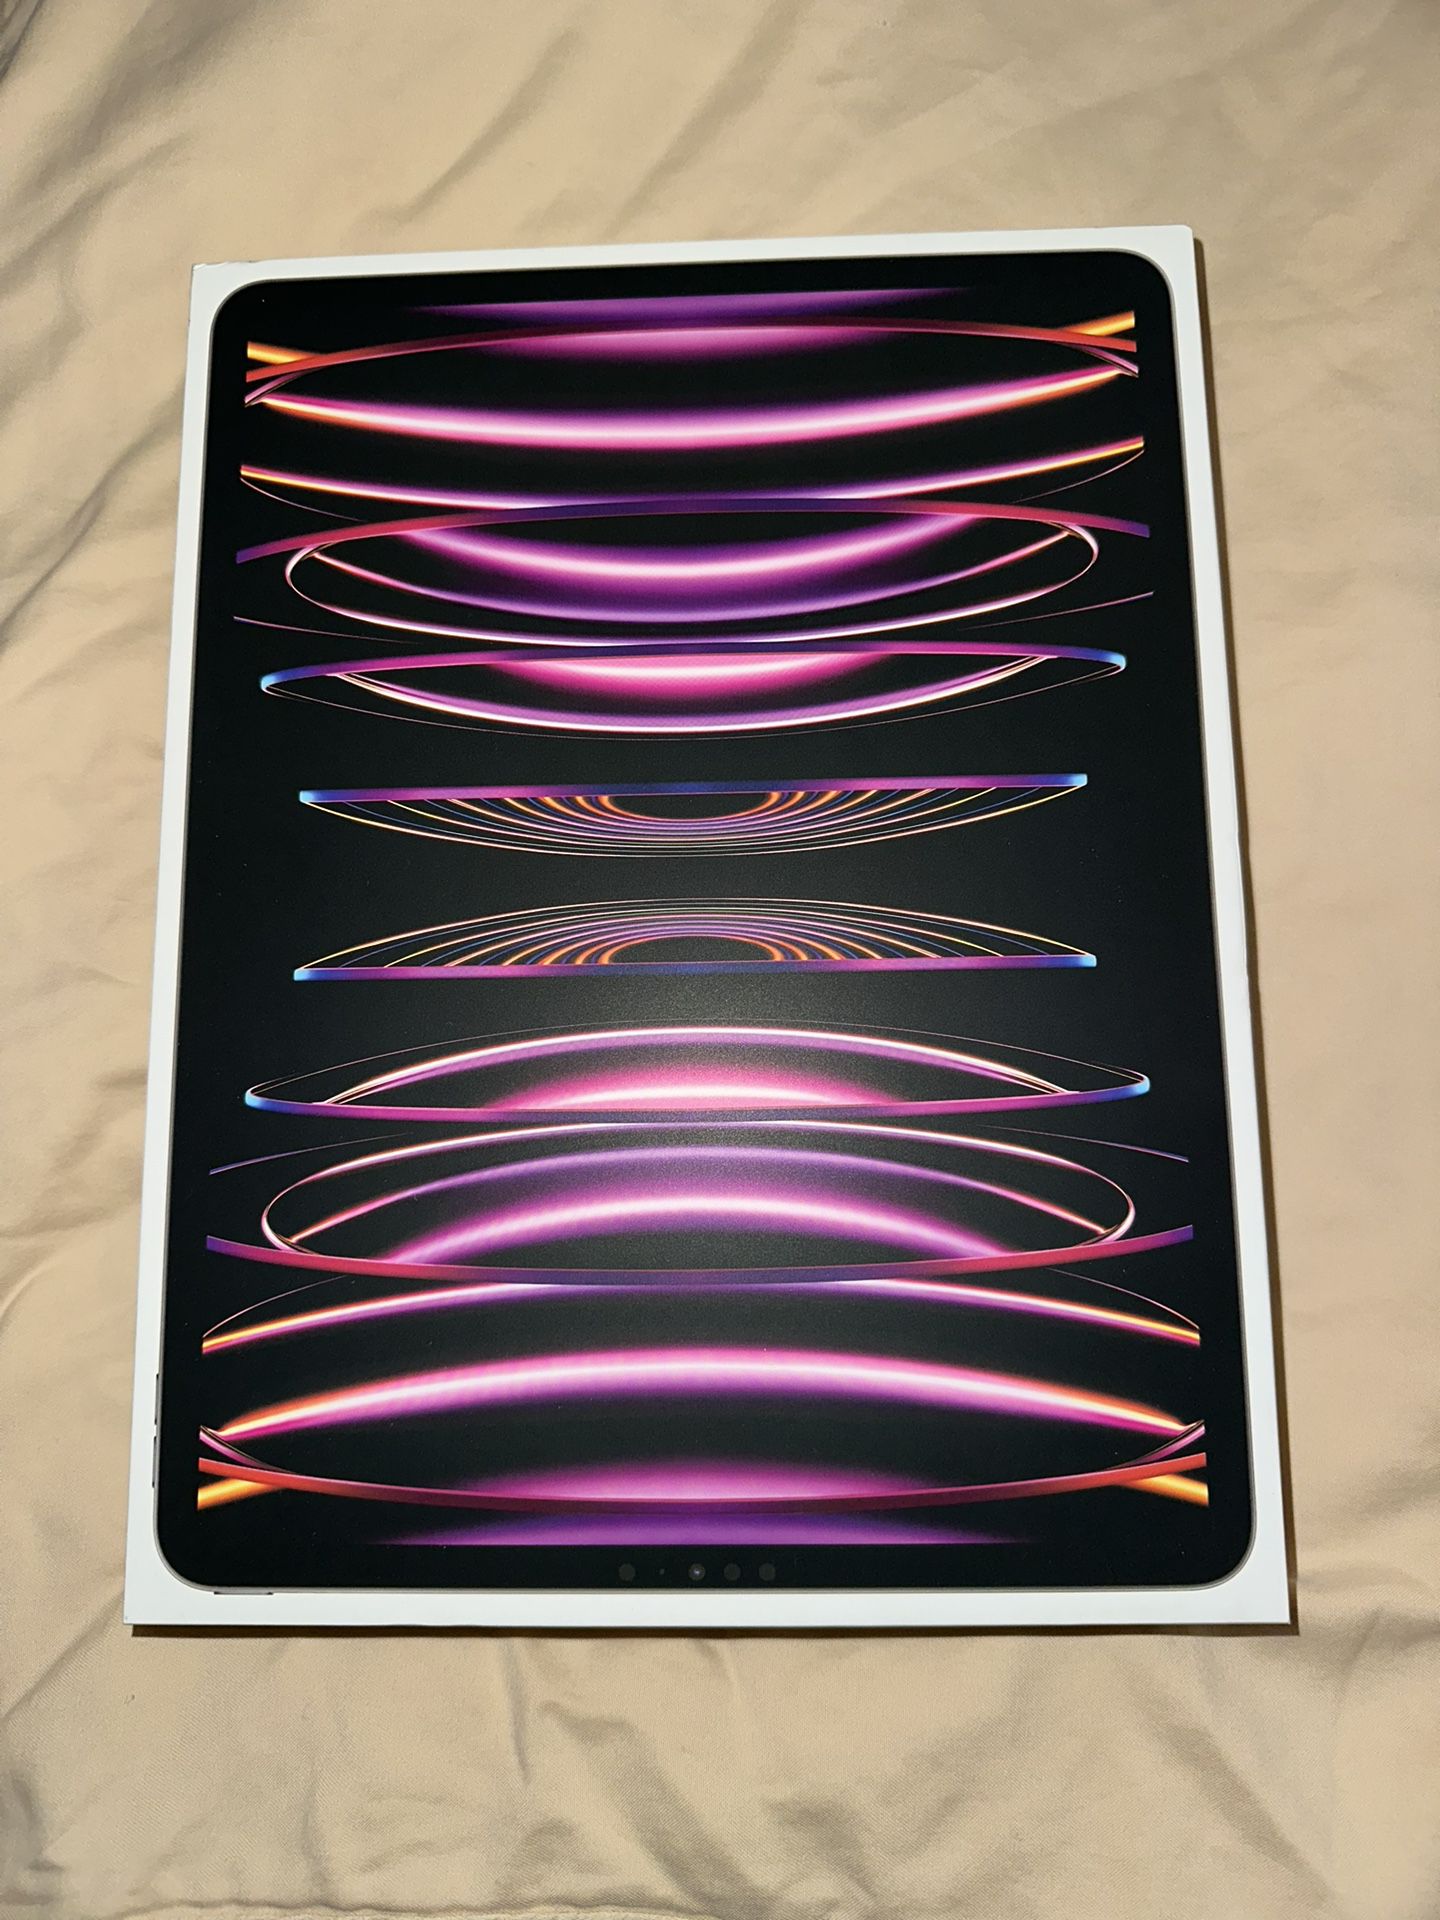 New Sealed Box Unlocked Space Black Apple iPad Pro 12.9 6th Gen 256gb 5G Cellular + WiFi I Can Come To you